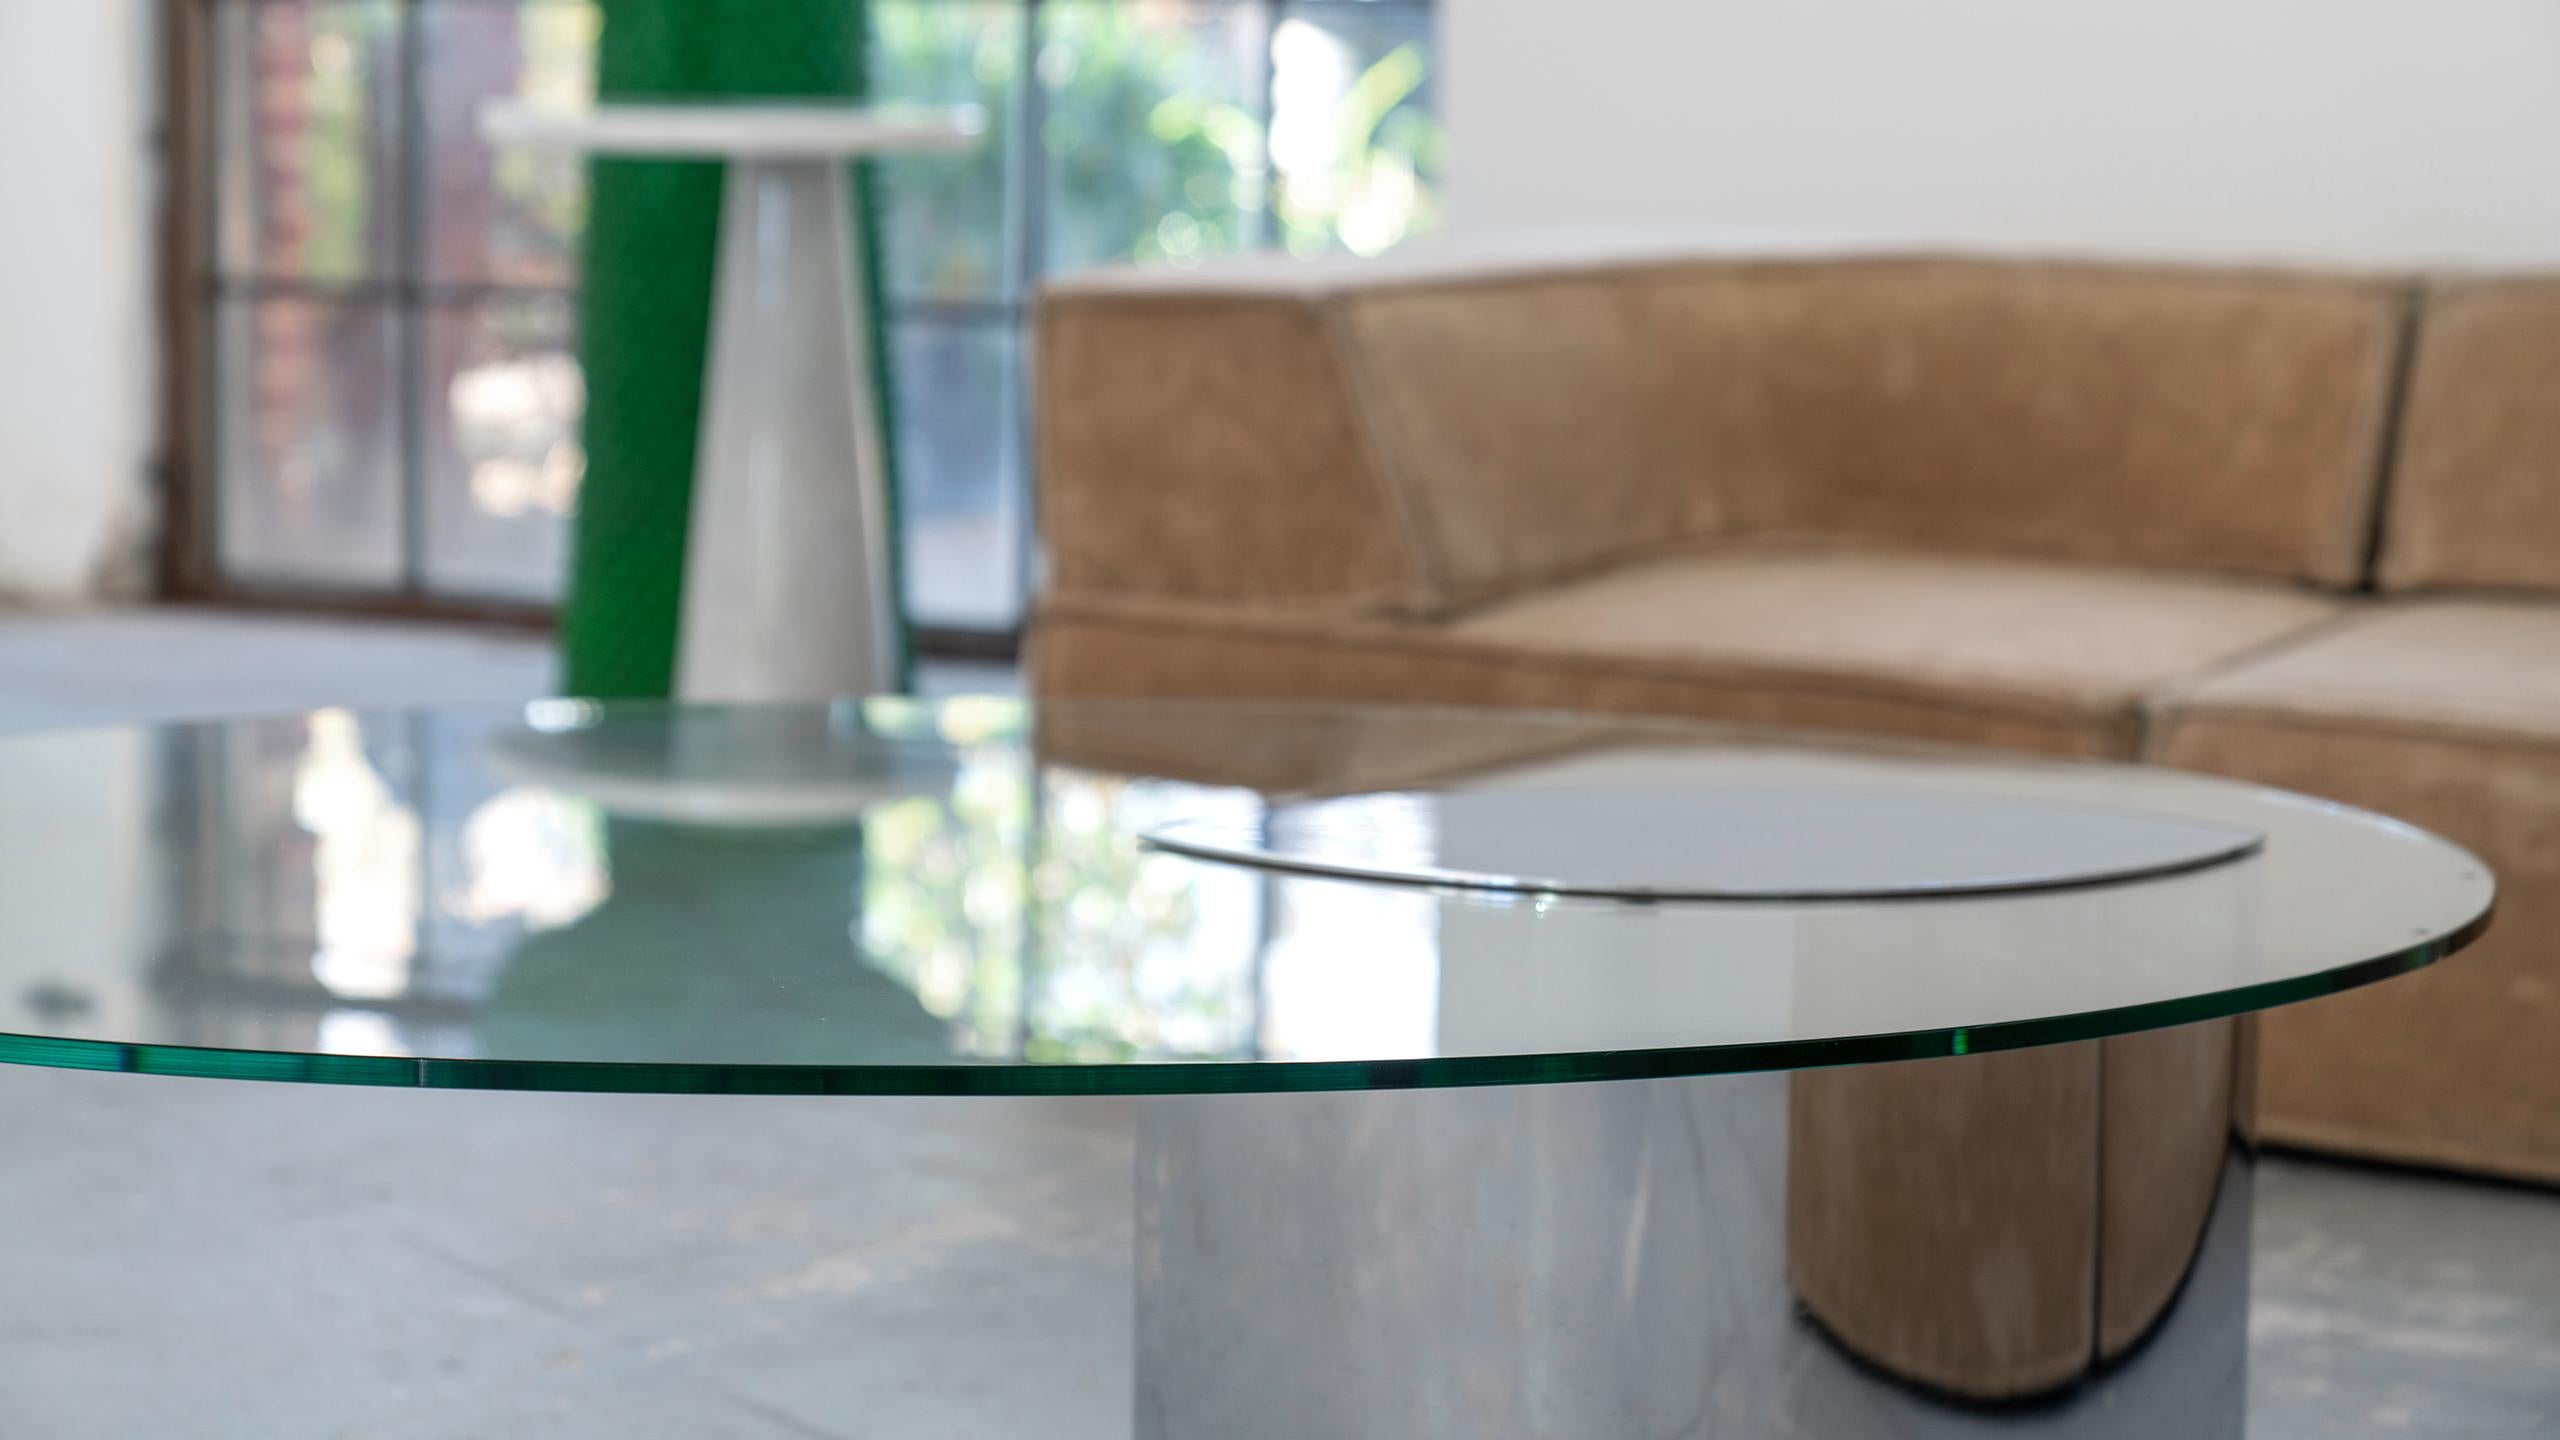 Cini Boeri - Lunario Glass Coffee Table, 1970 Knoll Interantional, Mid Century In Good Condition For Sale In Munster, NRW